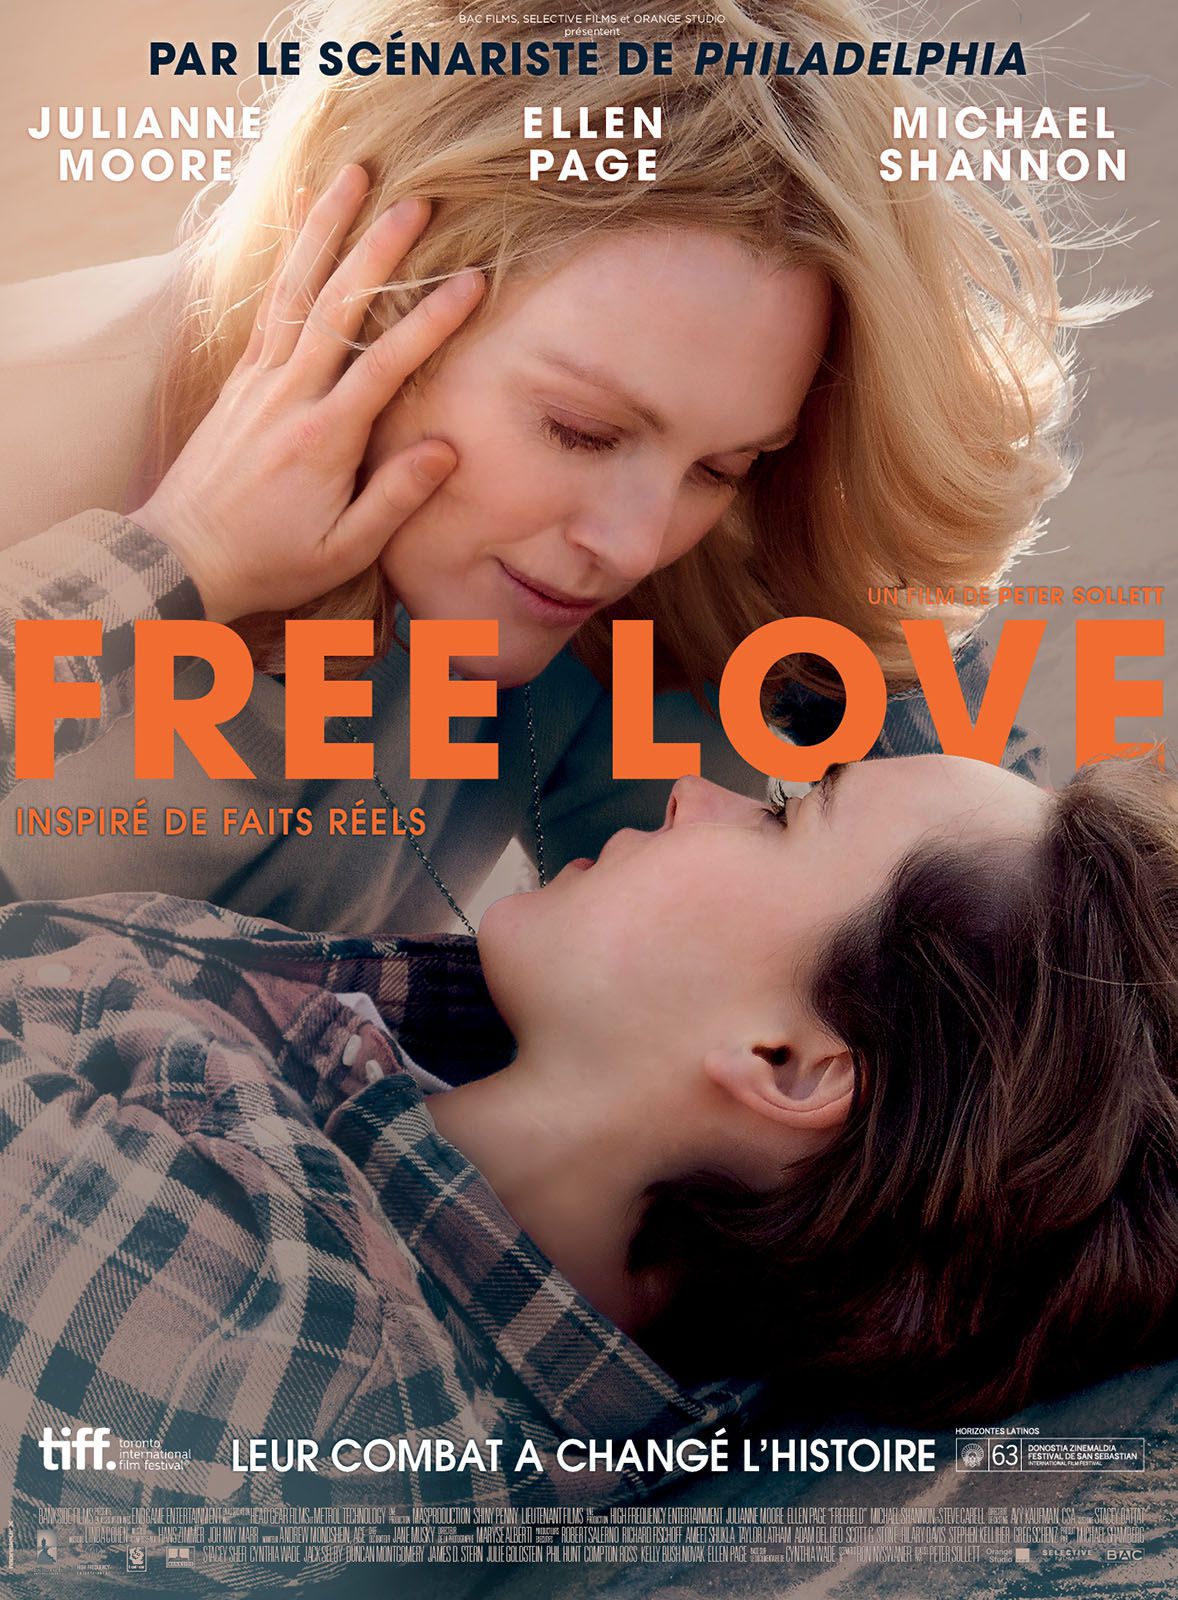 Free Love - Film (2015) streaming VF gratuit complet